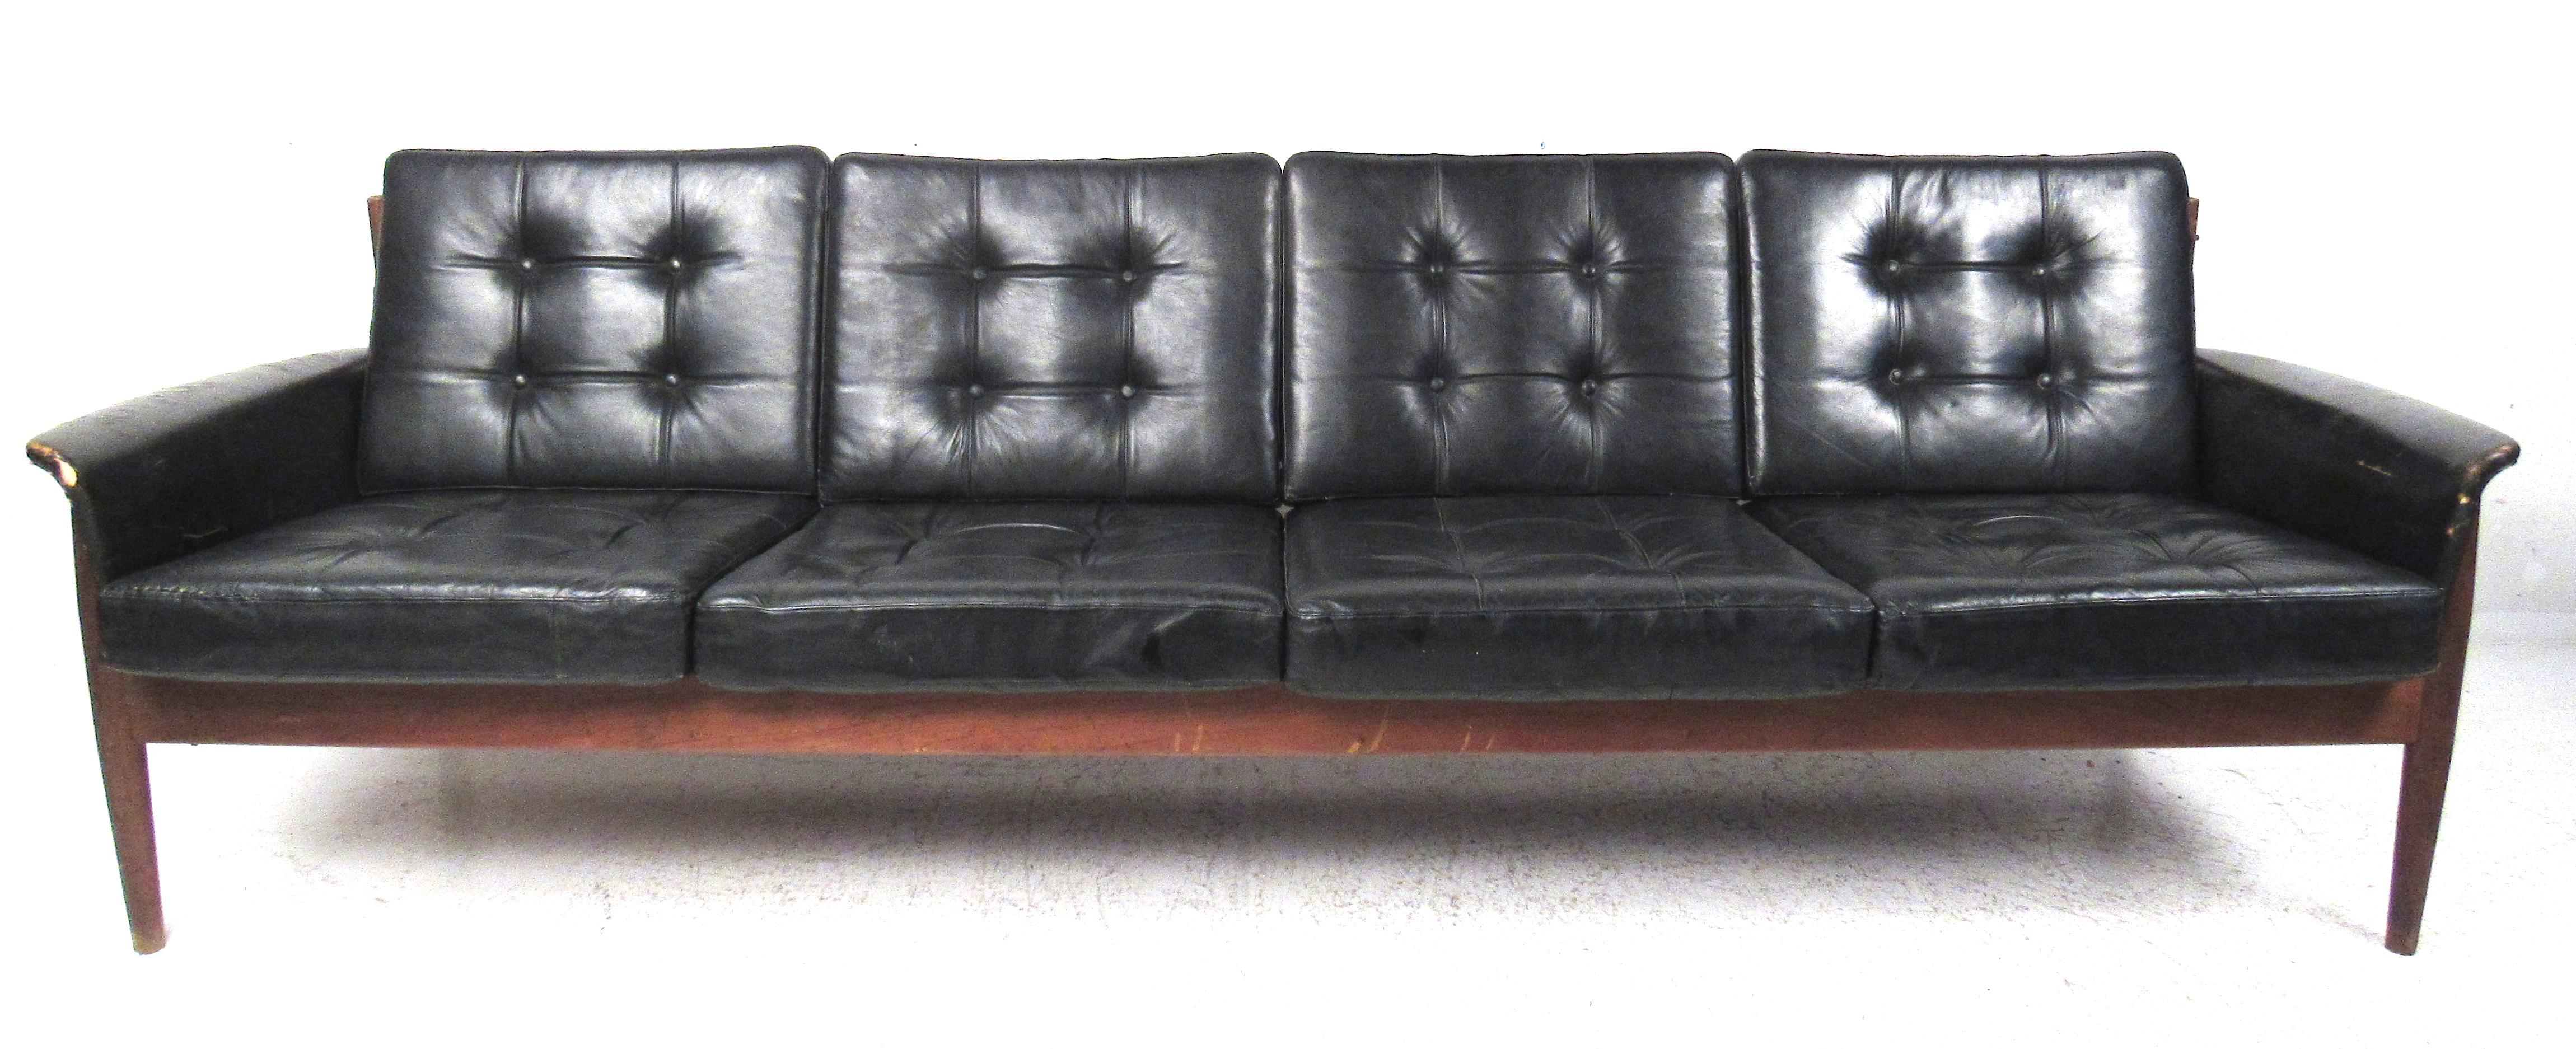 Model 168/4 sofa designed in 1962 by Charles ‘Fearnley’ France, the boss of France & Son. Produced
from solid teak with black leather upholstery, this sofa is identical to one designed by Grete Jalk with exception to the armrests which were added by